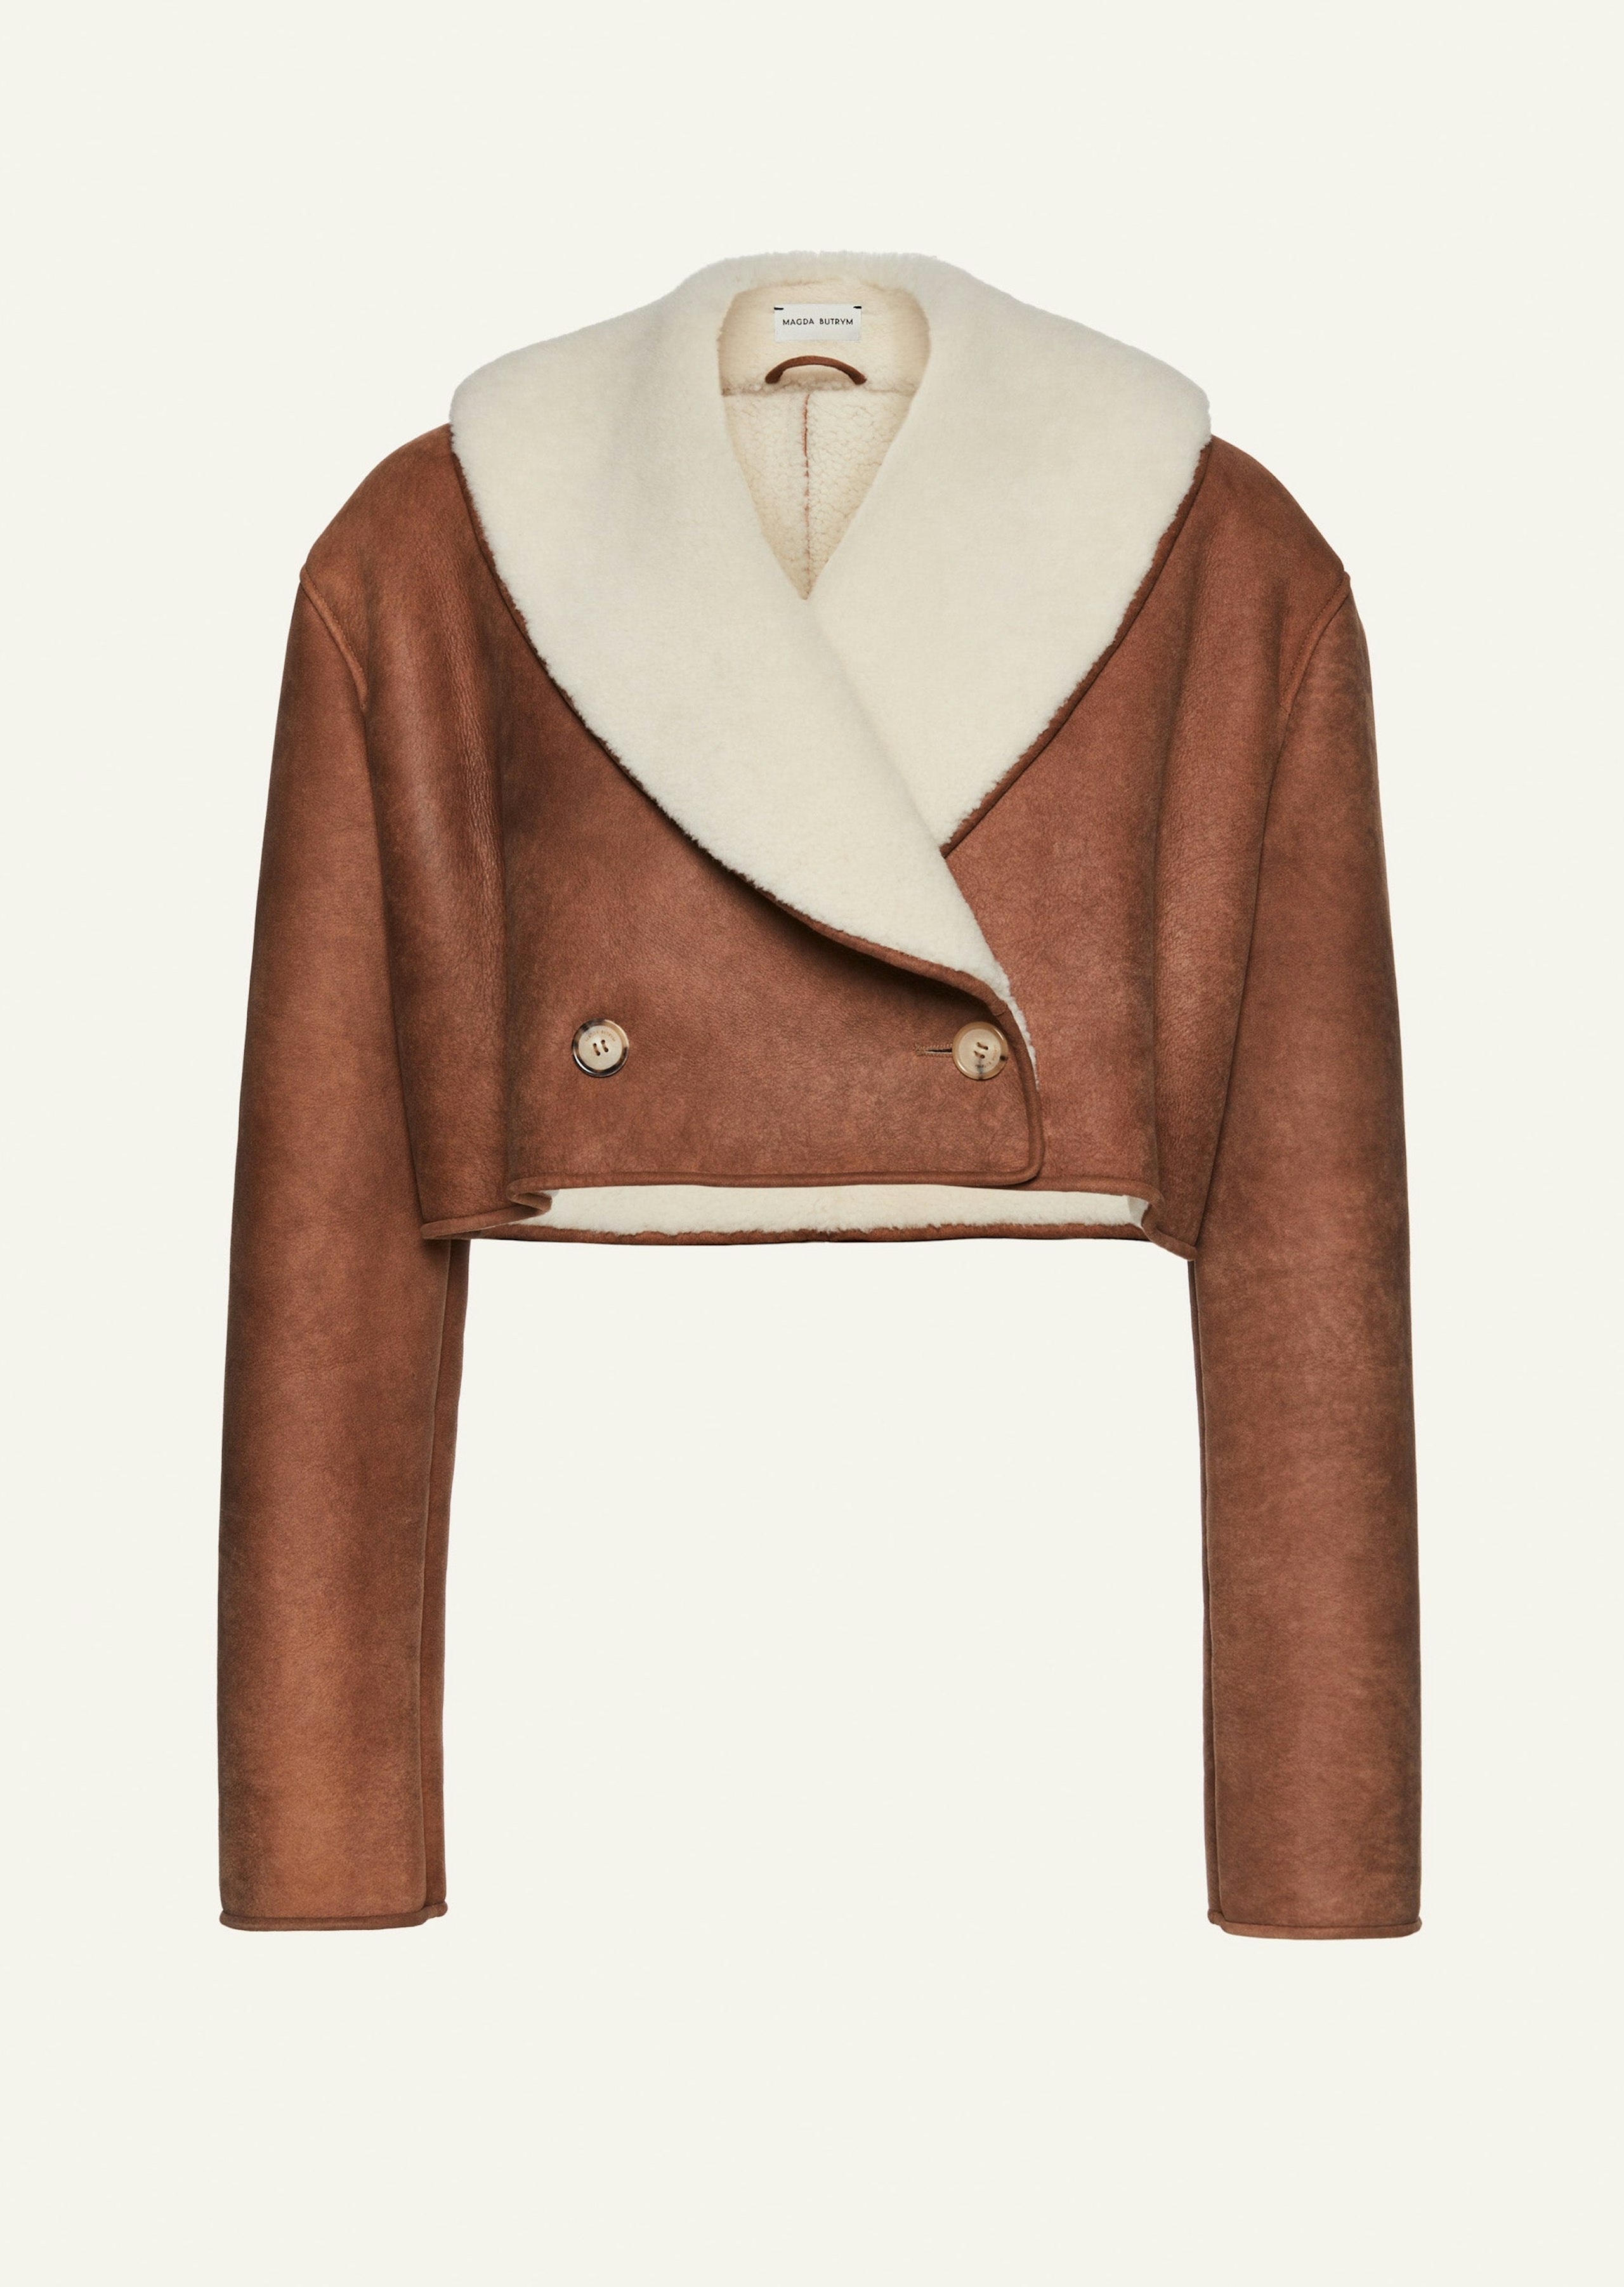 AW23 LEATHER 11 SHEARLING JACKET BEIGE